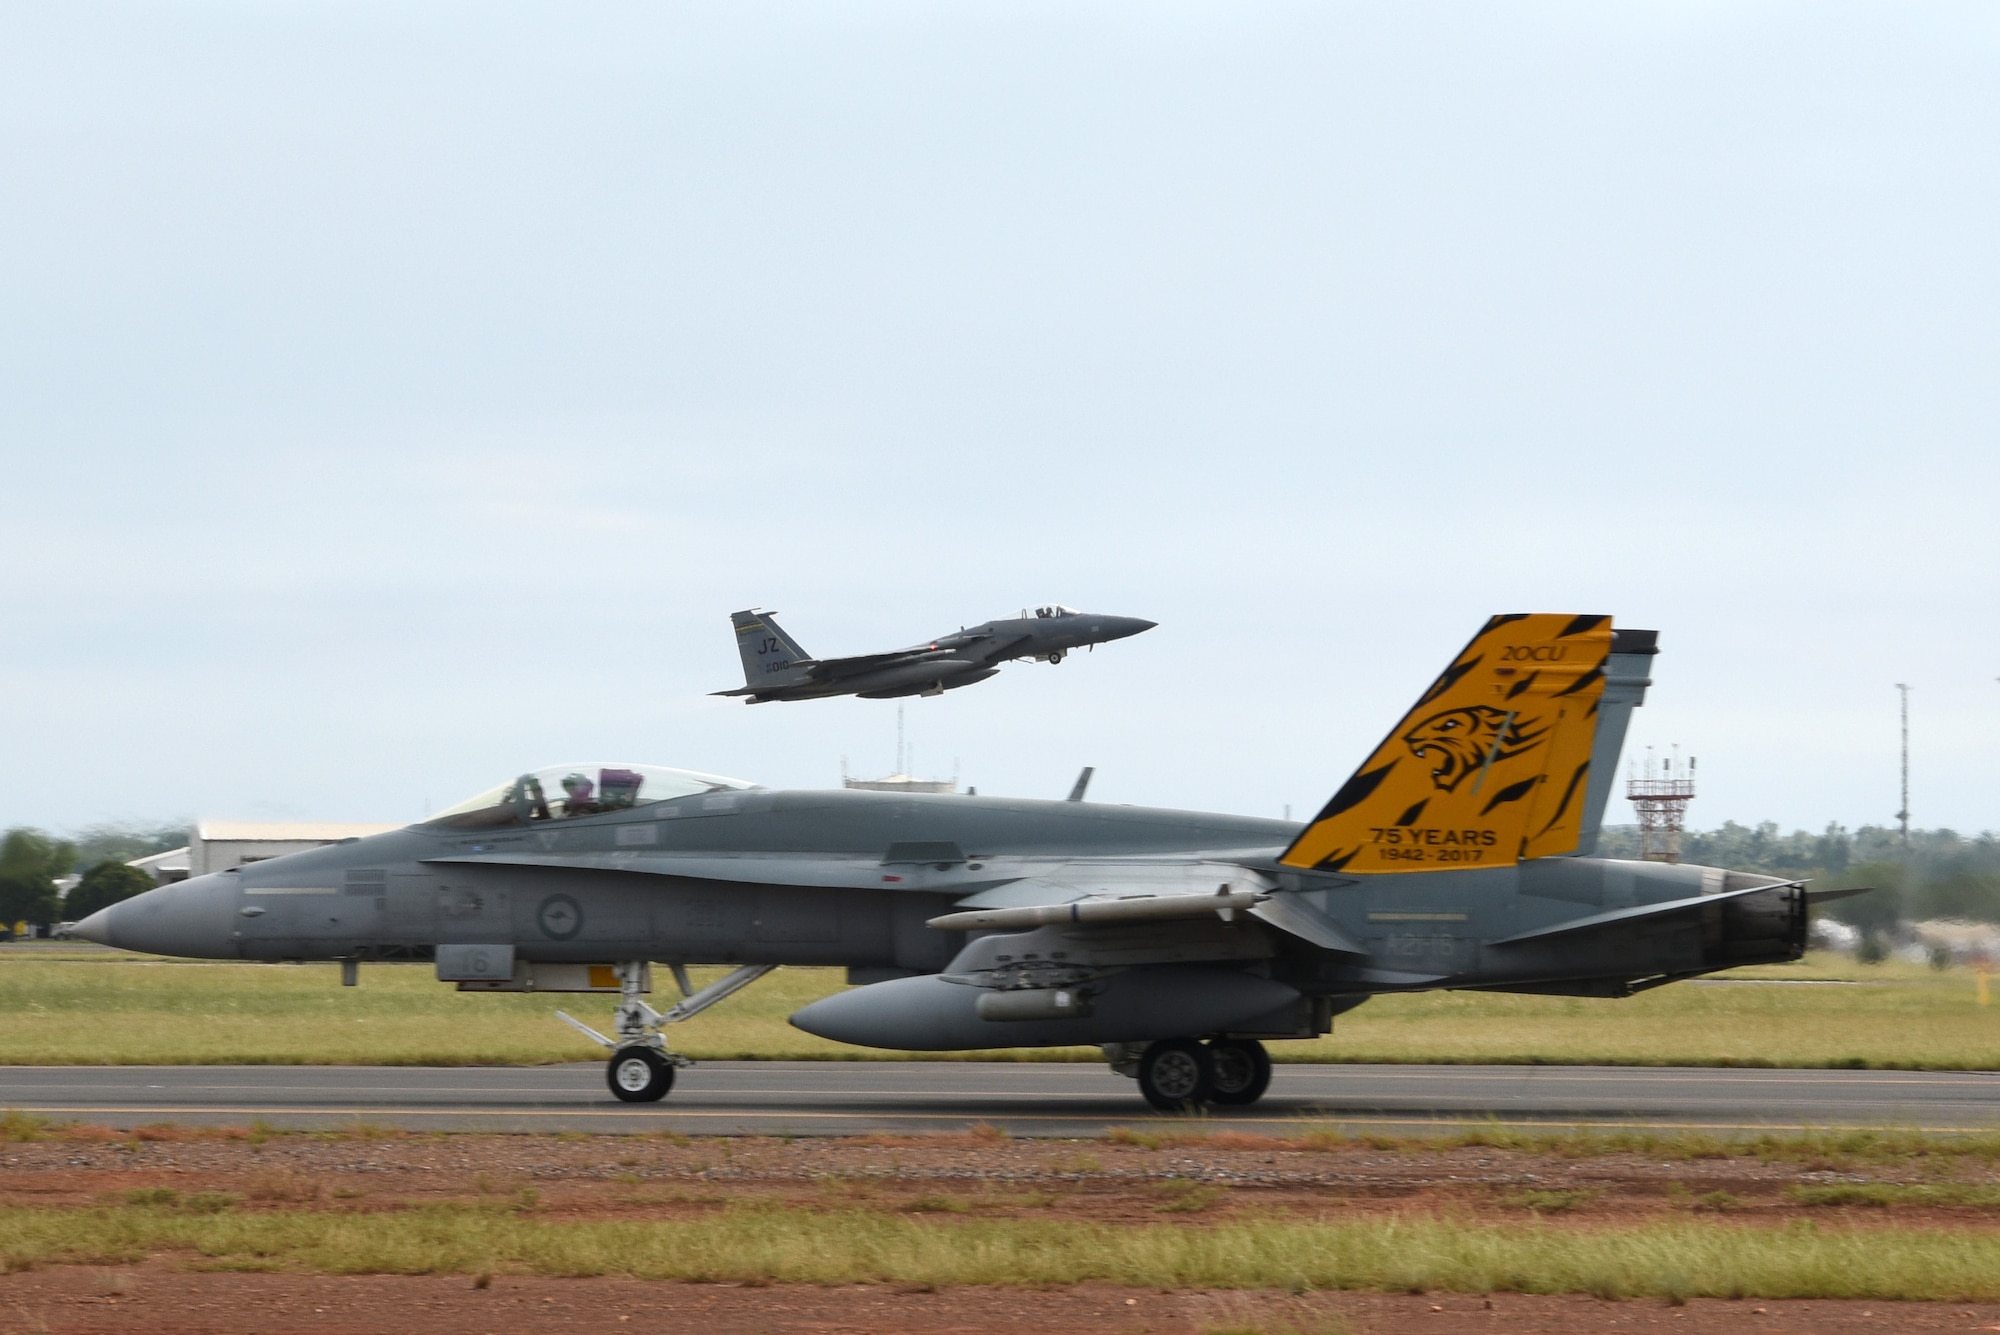 A U.S. Air Force F-15C Eagle assigned to the 194th Expeditionary Fighter Squadron, California Air National Guard, takes off while a Royal Australian Air Force F/A-18A Hornet taxis during Exercise Diamond Storm at RAAF Base Darwin, Northern Territory, May 10, 2019.